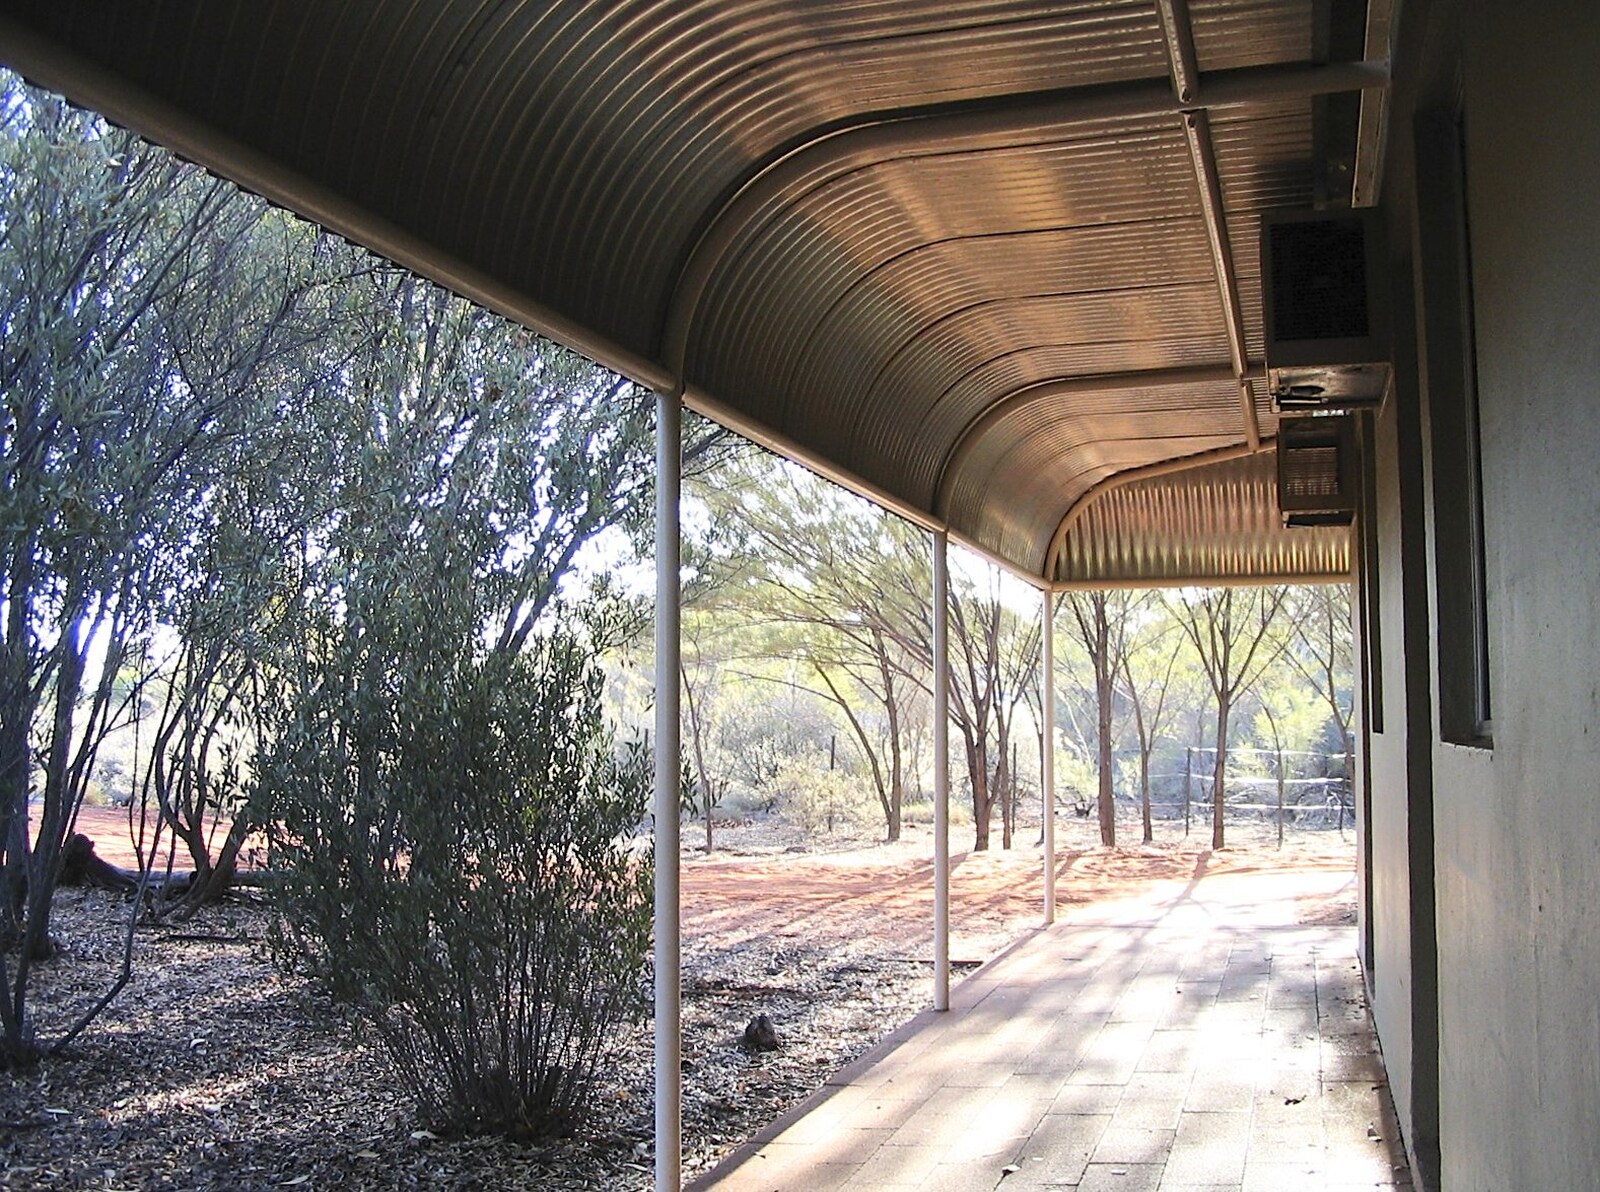 The verandah outside Nosher's dorm room from The Red Centre: Yulara and Uluru, Northern Territories, Australia - 8th October 2004